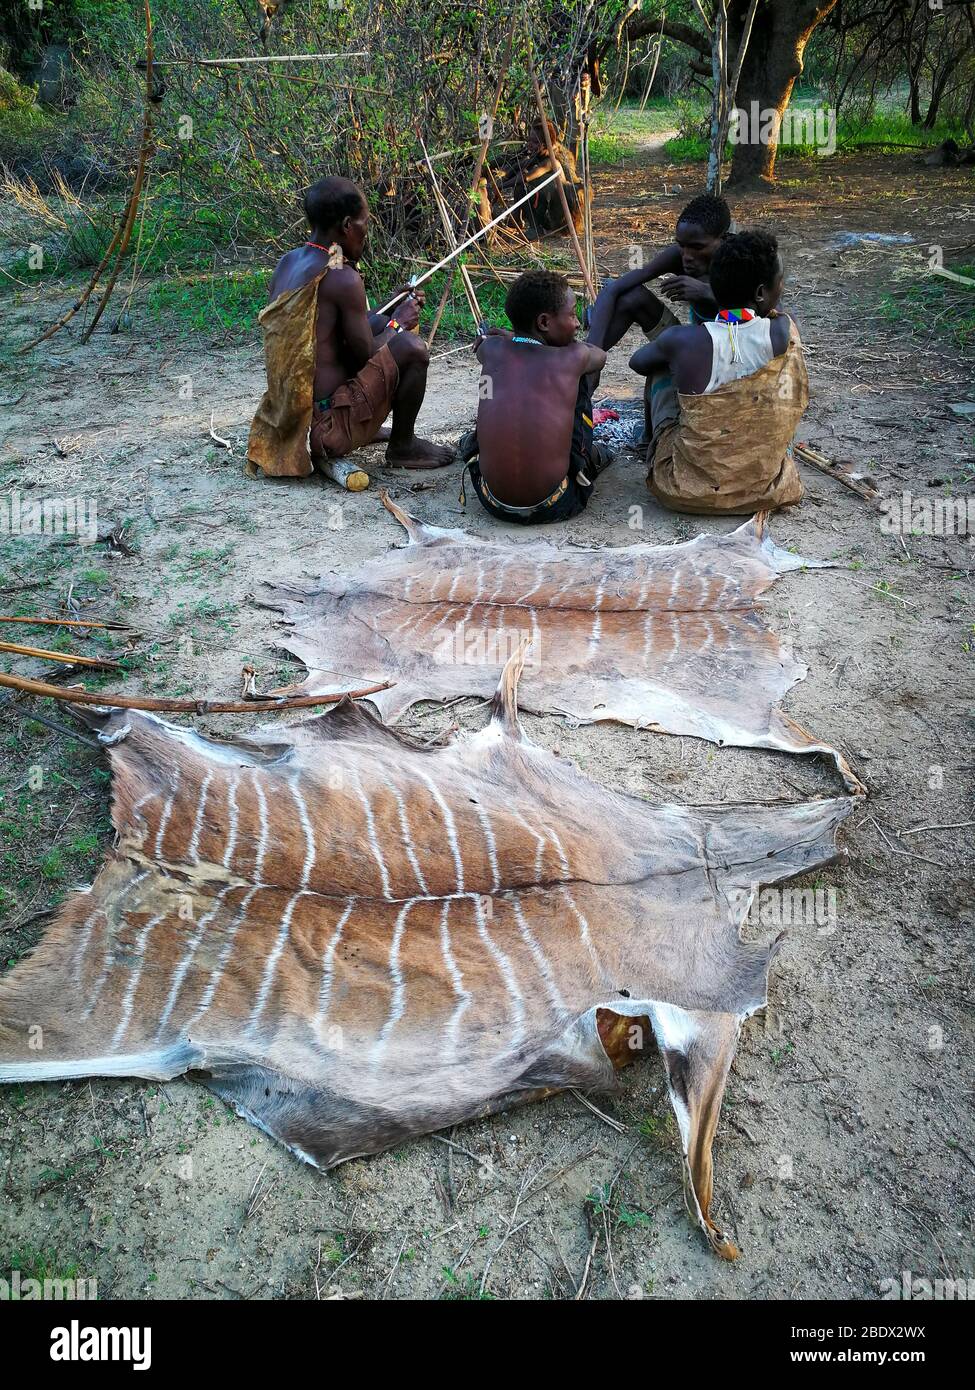 Hadzabe man curing leather from an antelope hide. Photographed at Lake Eyasi, Tanzania Stock Photo